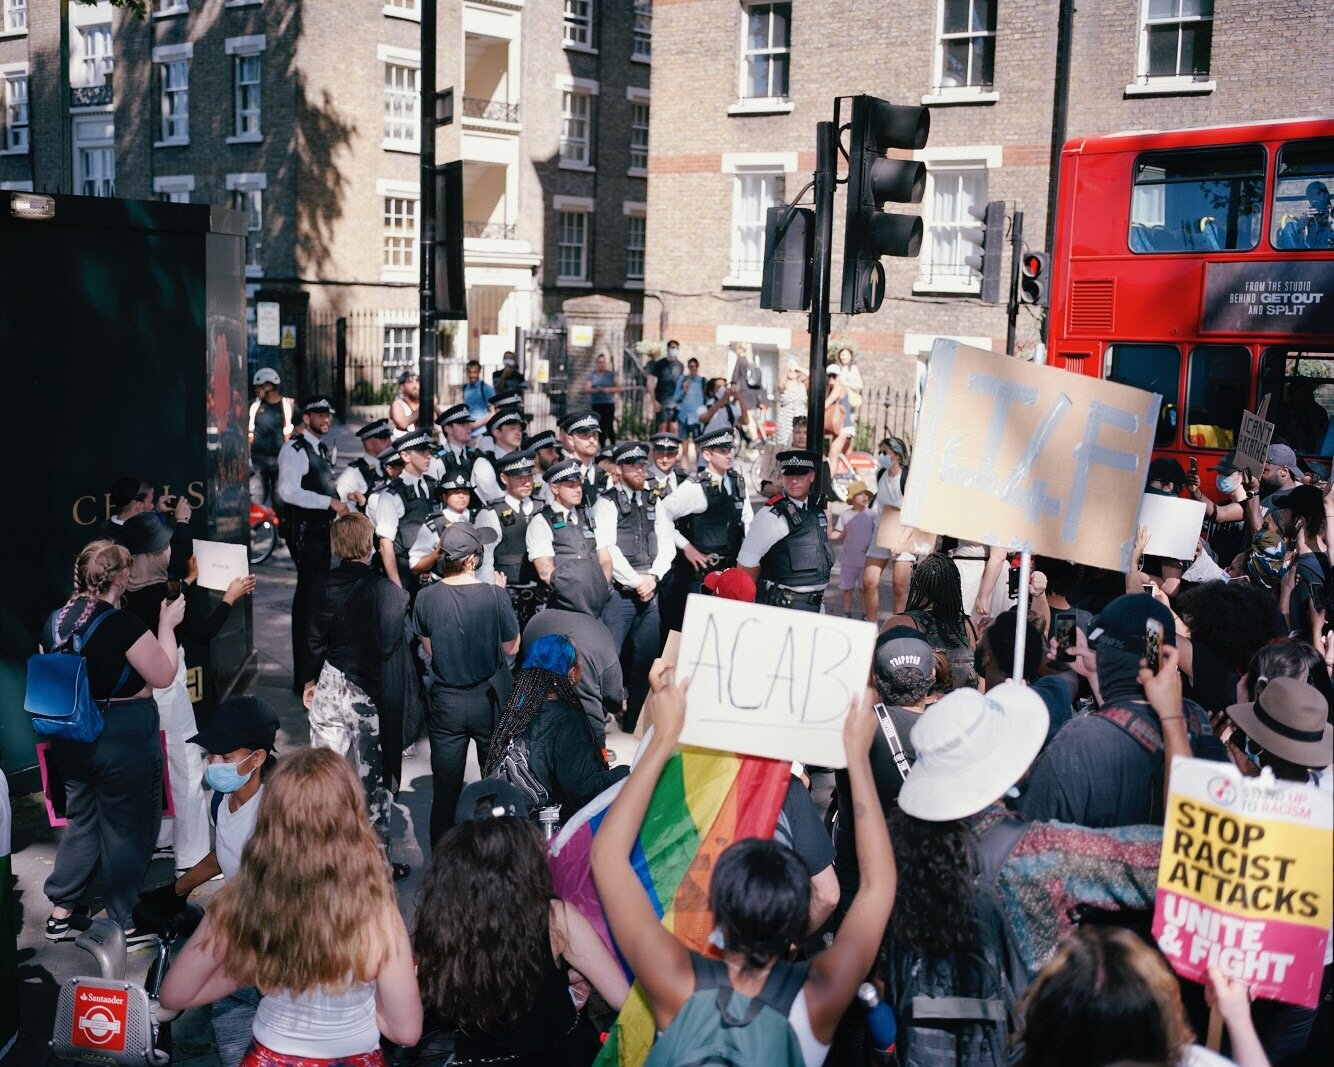 London anti-racism protests 31st May 2020_Photographs by T A Sussex (14).jpg